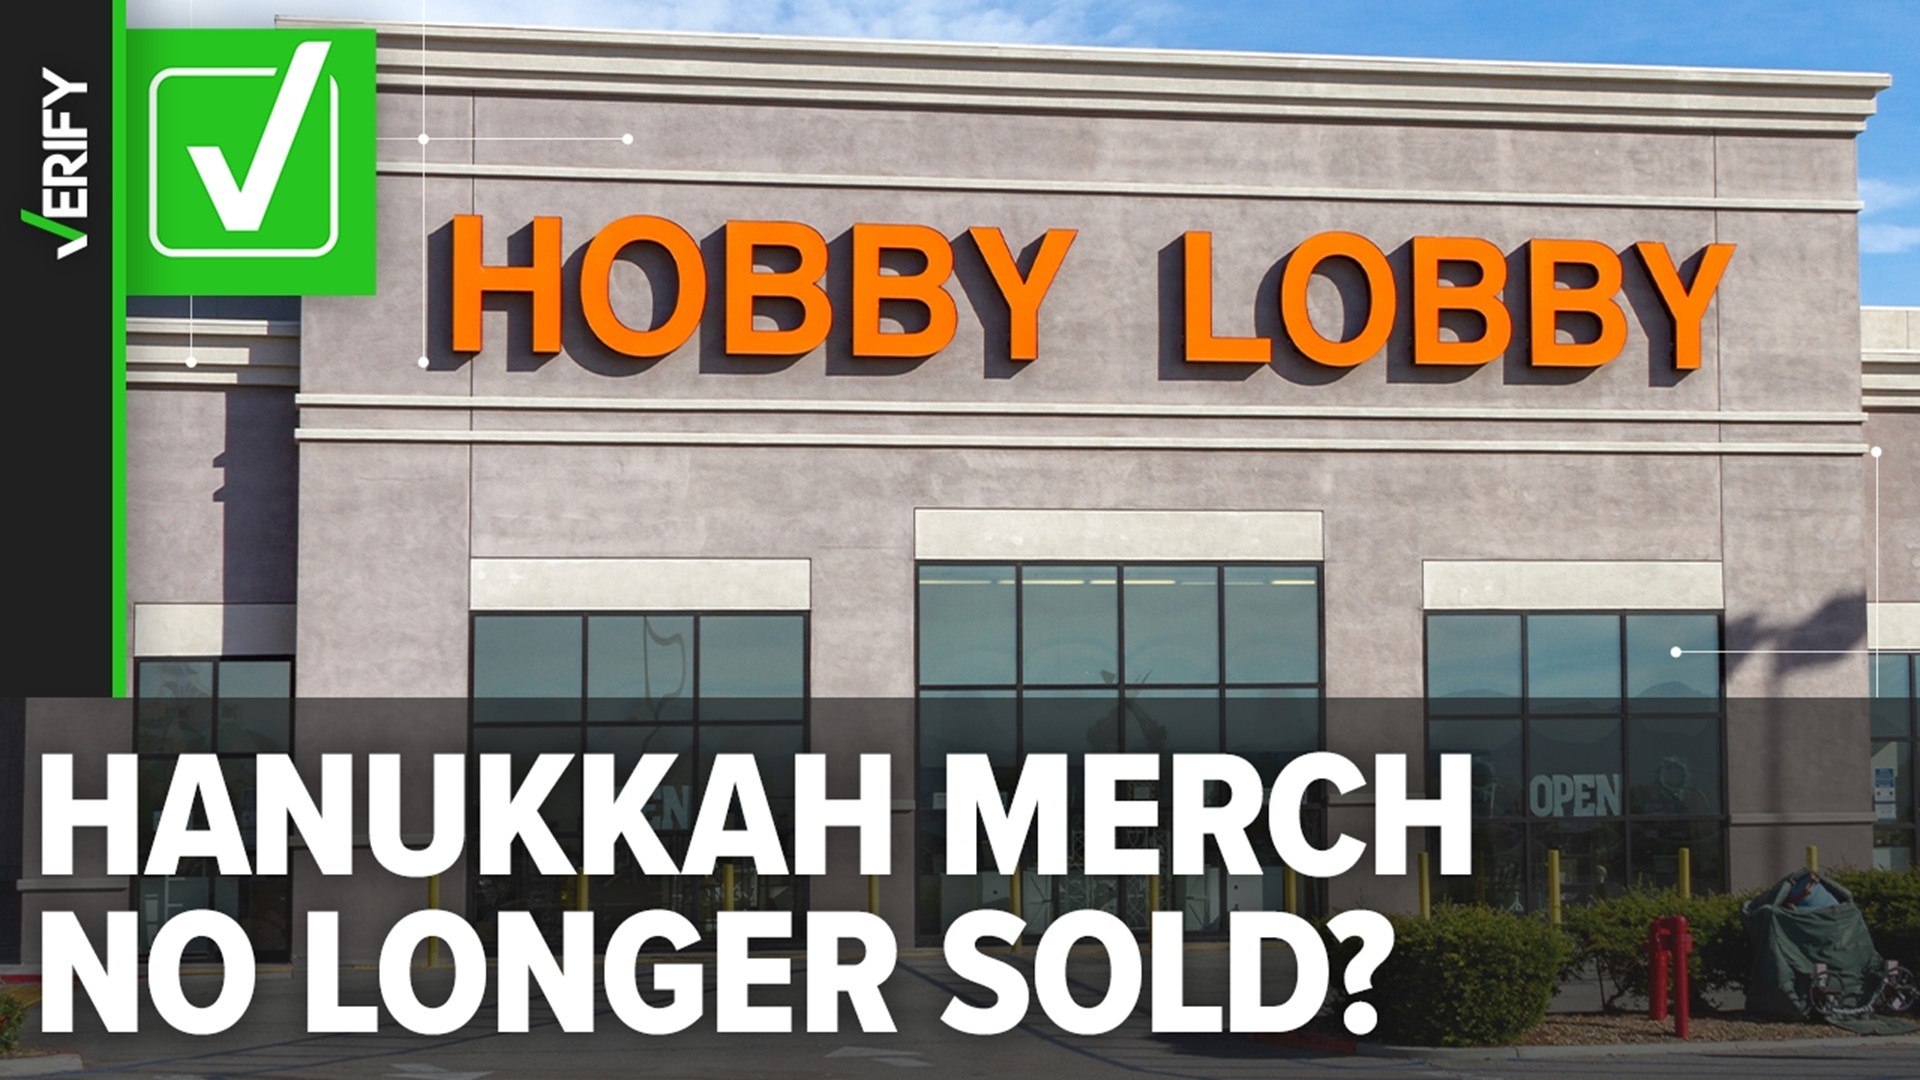 Hobby Lobby’s website sold Hanukkah merchandise between 2015 and 2021, but it stopped stocking Hanukkah products by the 2022 holiday season.